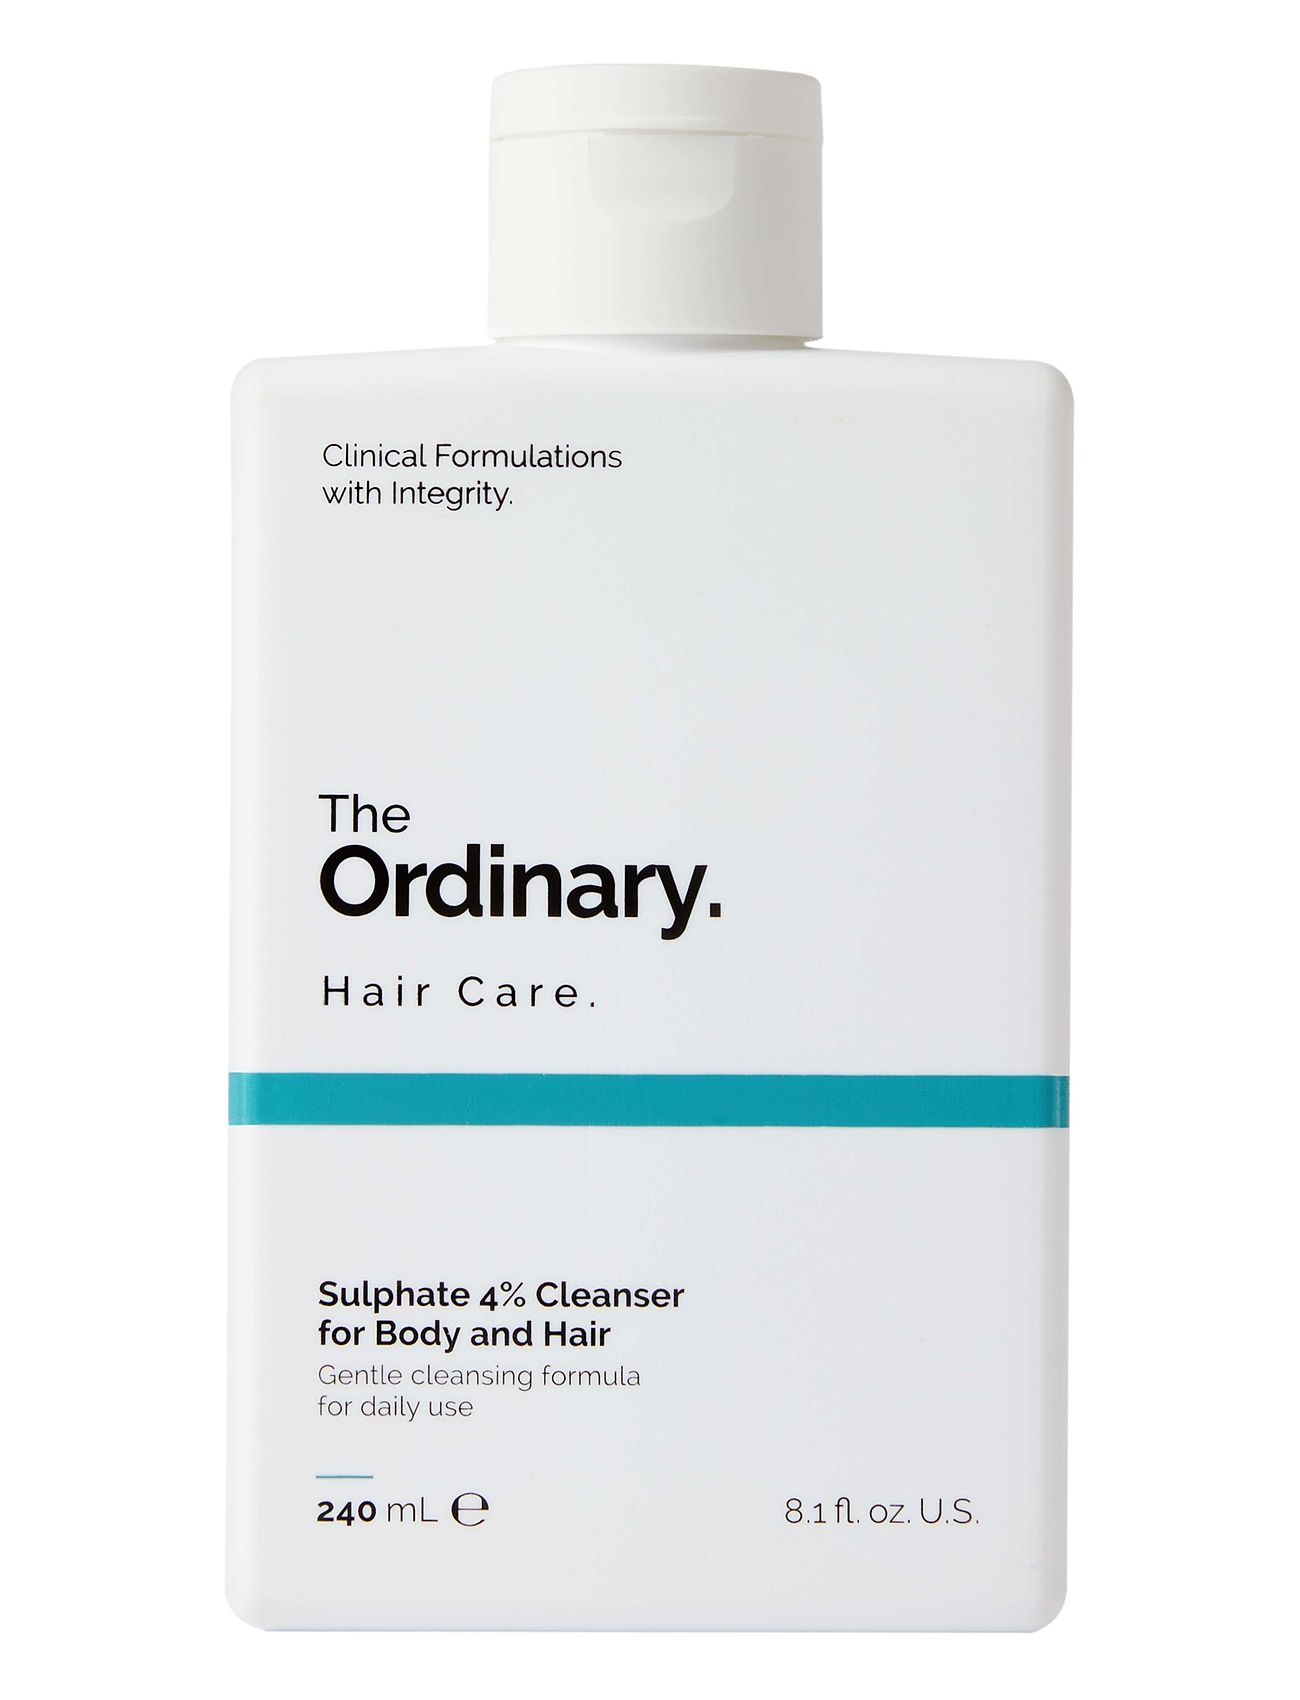 4% Sulphate Cleanser For Body And Hair Shower Gel Badesæbe Nude The Ordinary